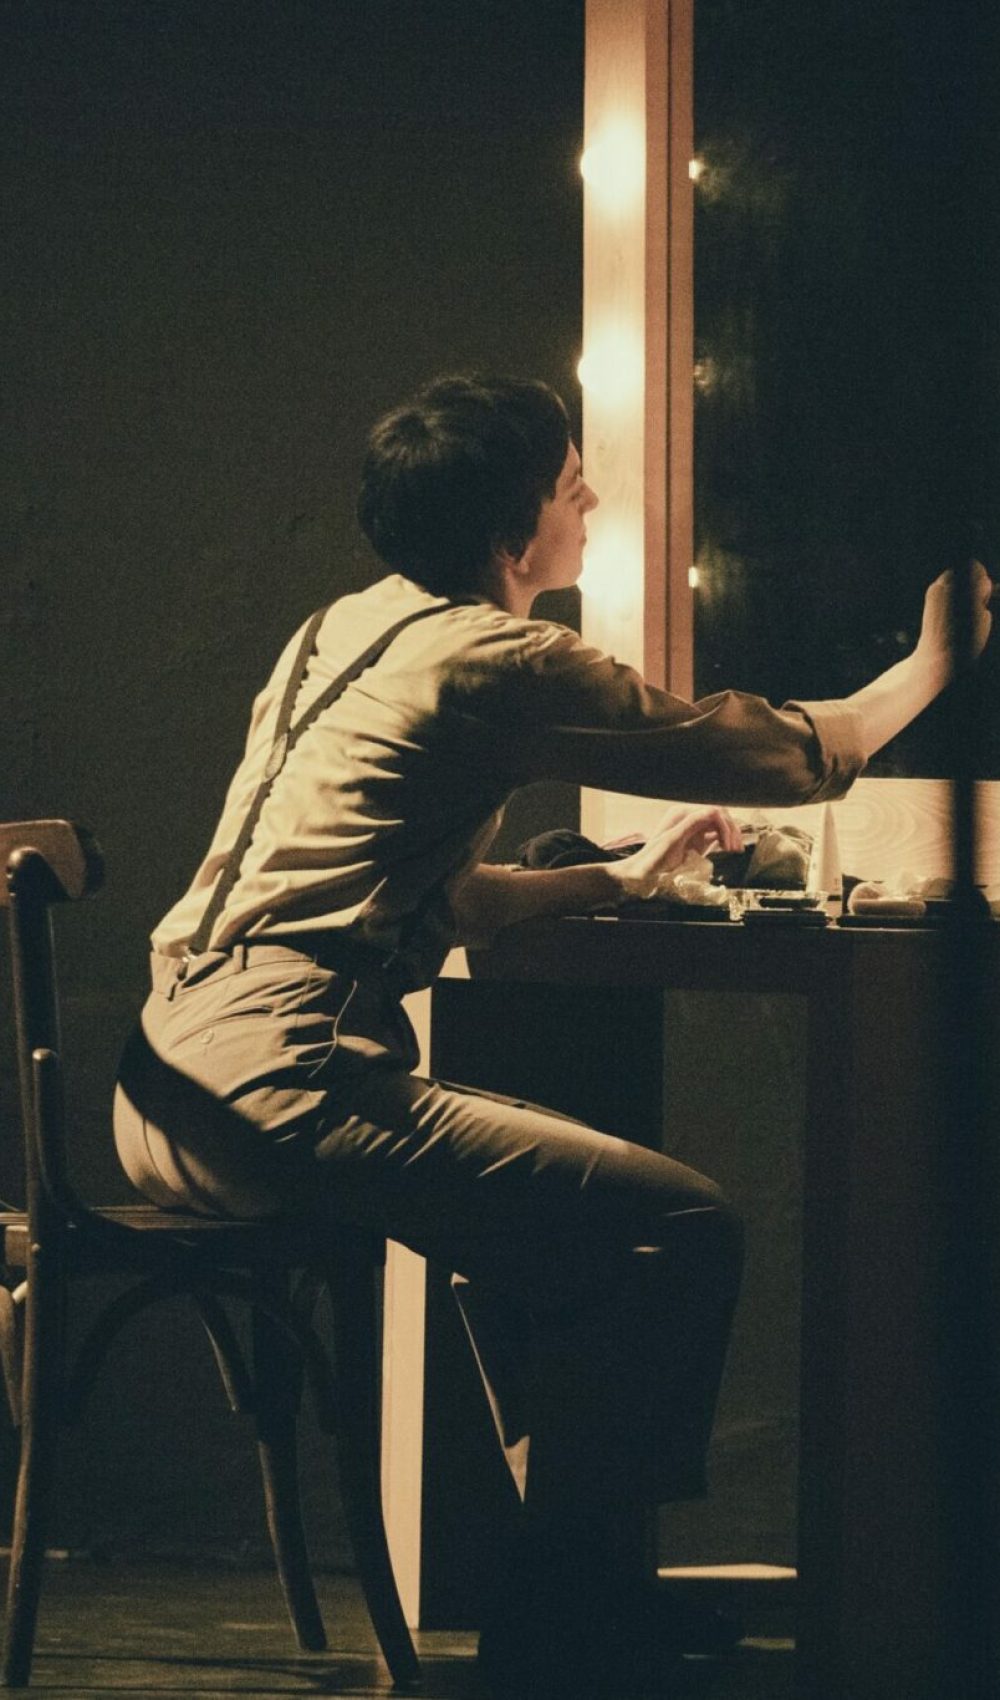 Gillian as Jean-Claude at his dressing table in The Clown & His Shadow